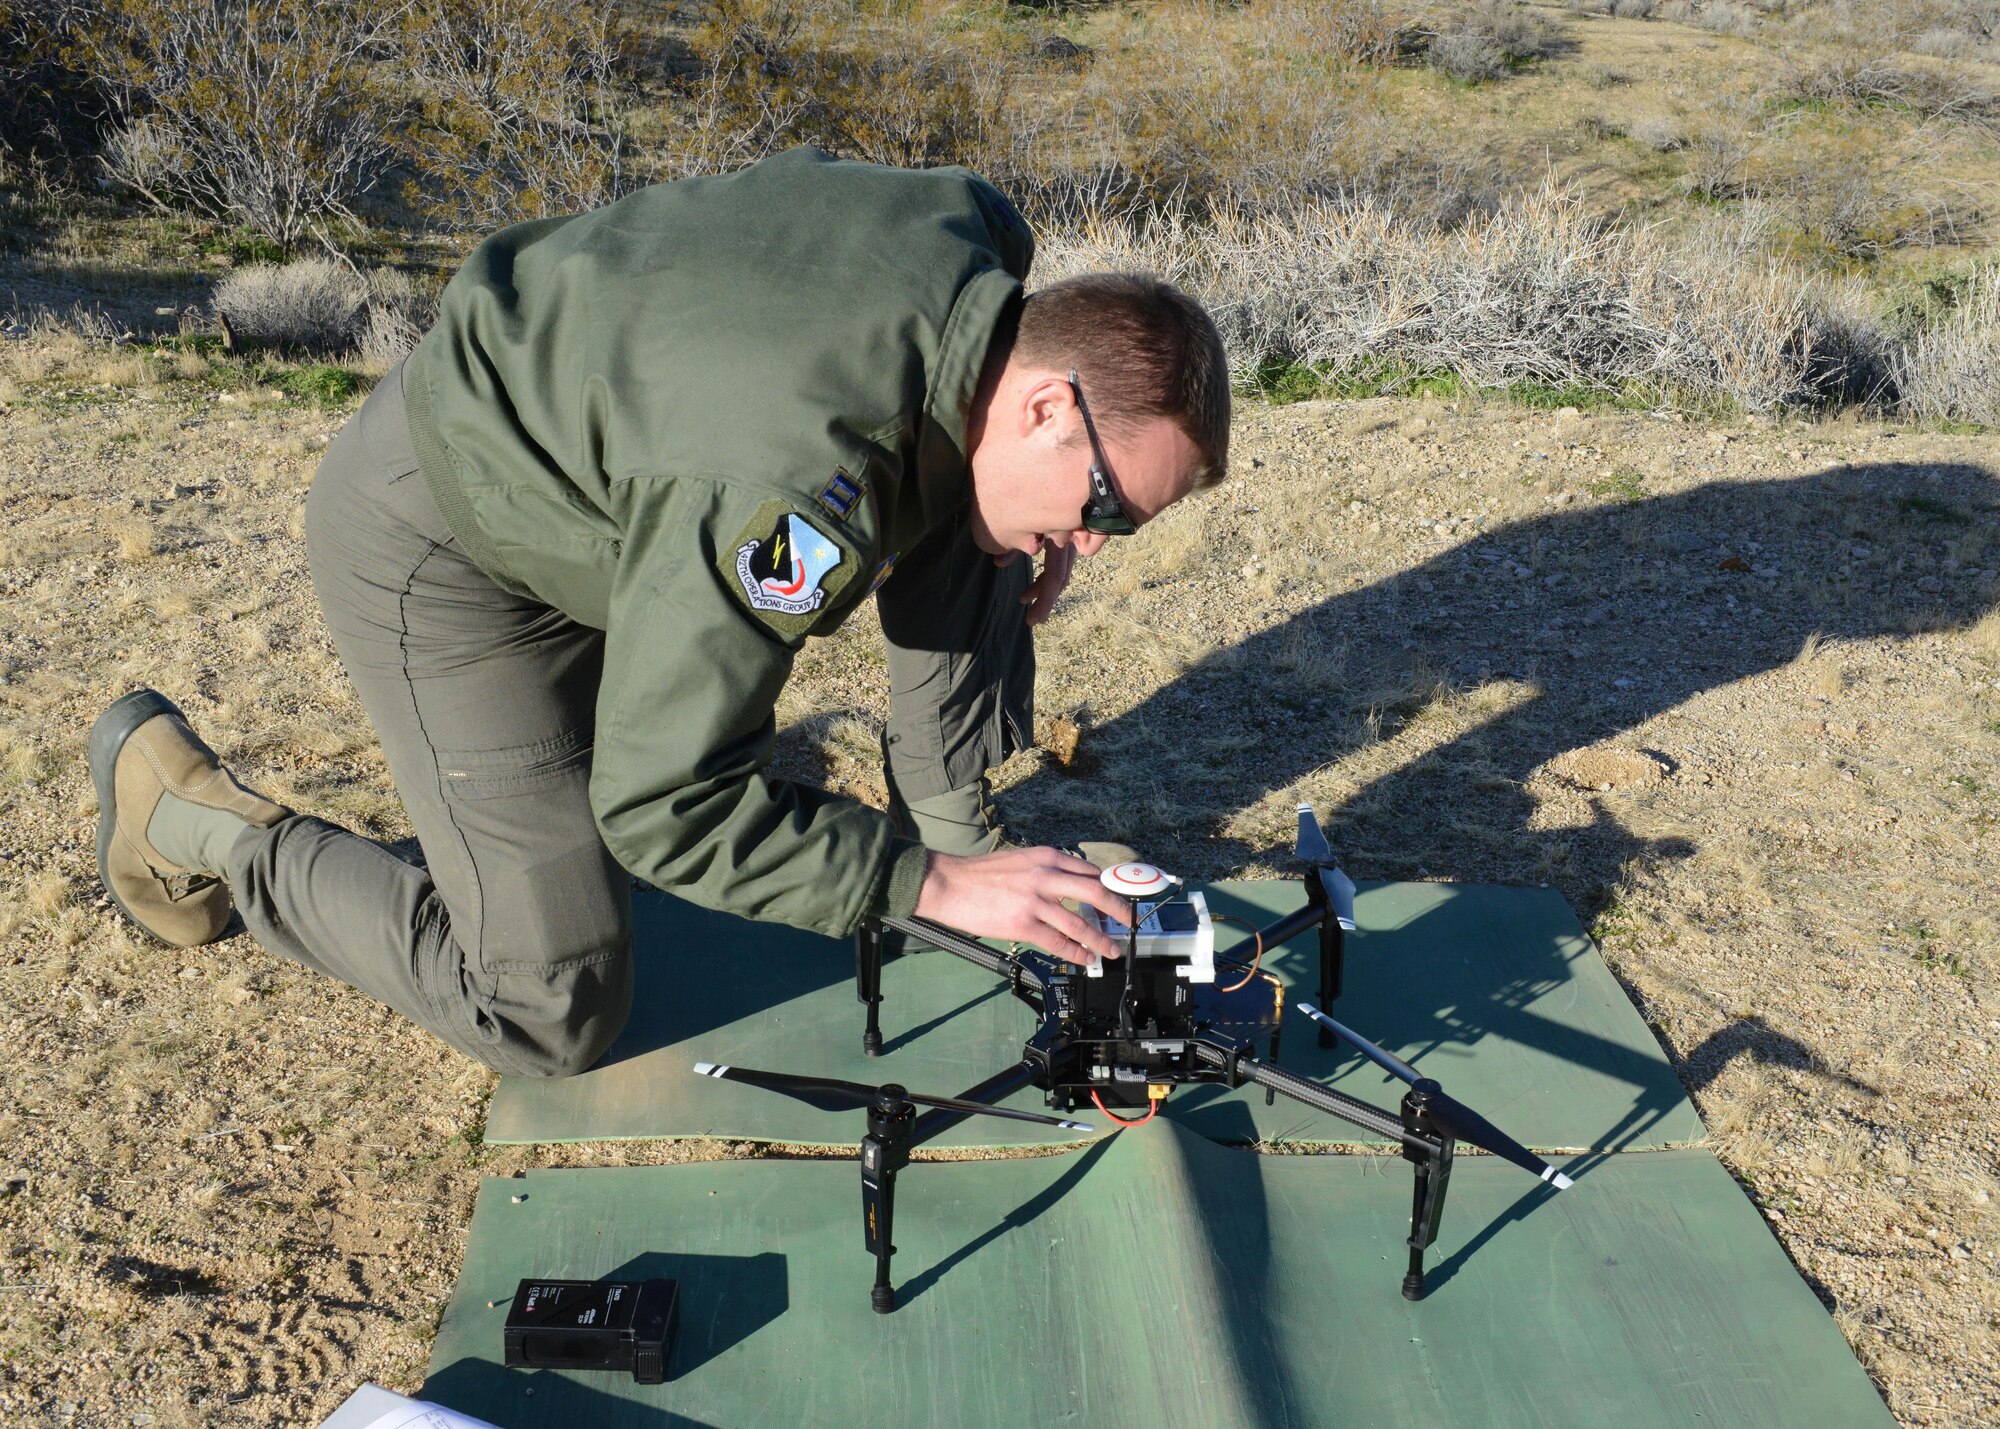 Capt. Justin Merrick, Emerging Technologies Combined Test Force, lead engineer, prepares to power on a quadcopter used during the ET CTF’s first test Feb. 13. (U.S. Air Force photo by Kenji Thuloweit)